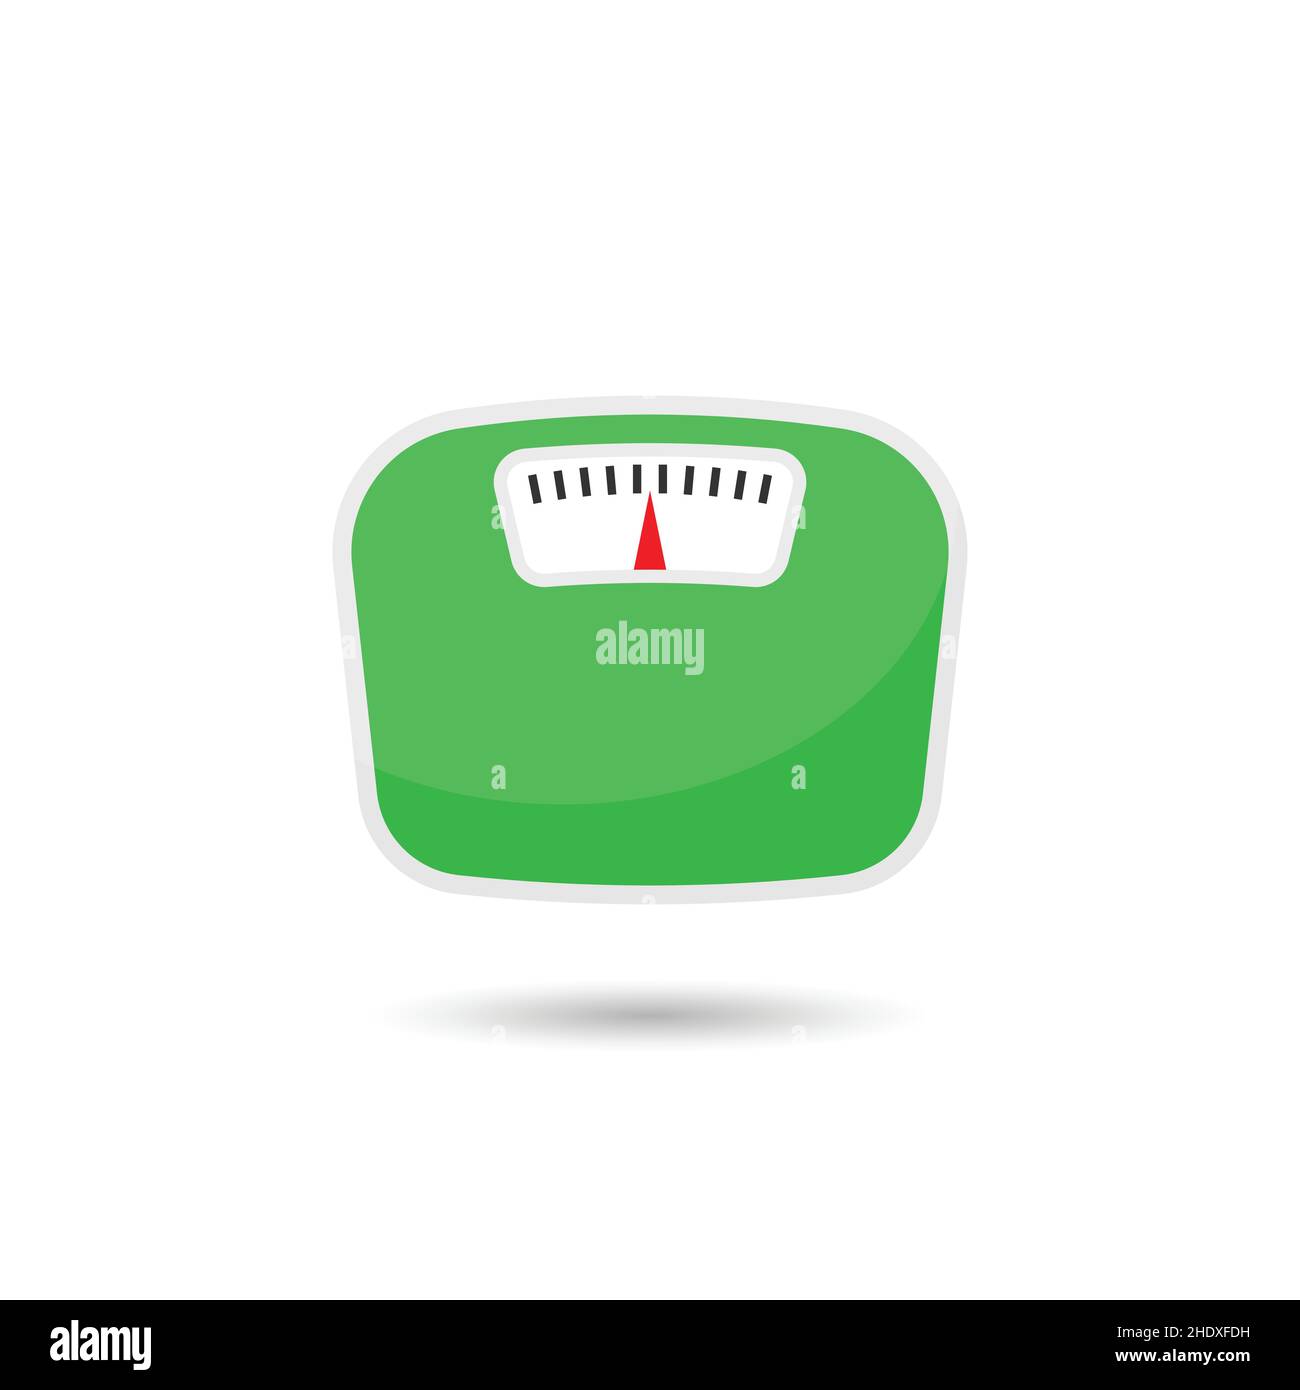 https://c8.alamy.com/comp/2HDXFDH/bathroom-weight-scale-icon-in-flat-style-mass-measurement-vector-illustration-on-isolated-background-overweight-sign-business-concept-2HDXFDH.jpg